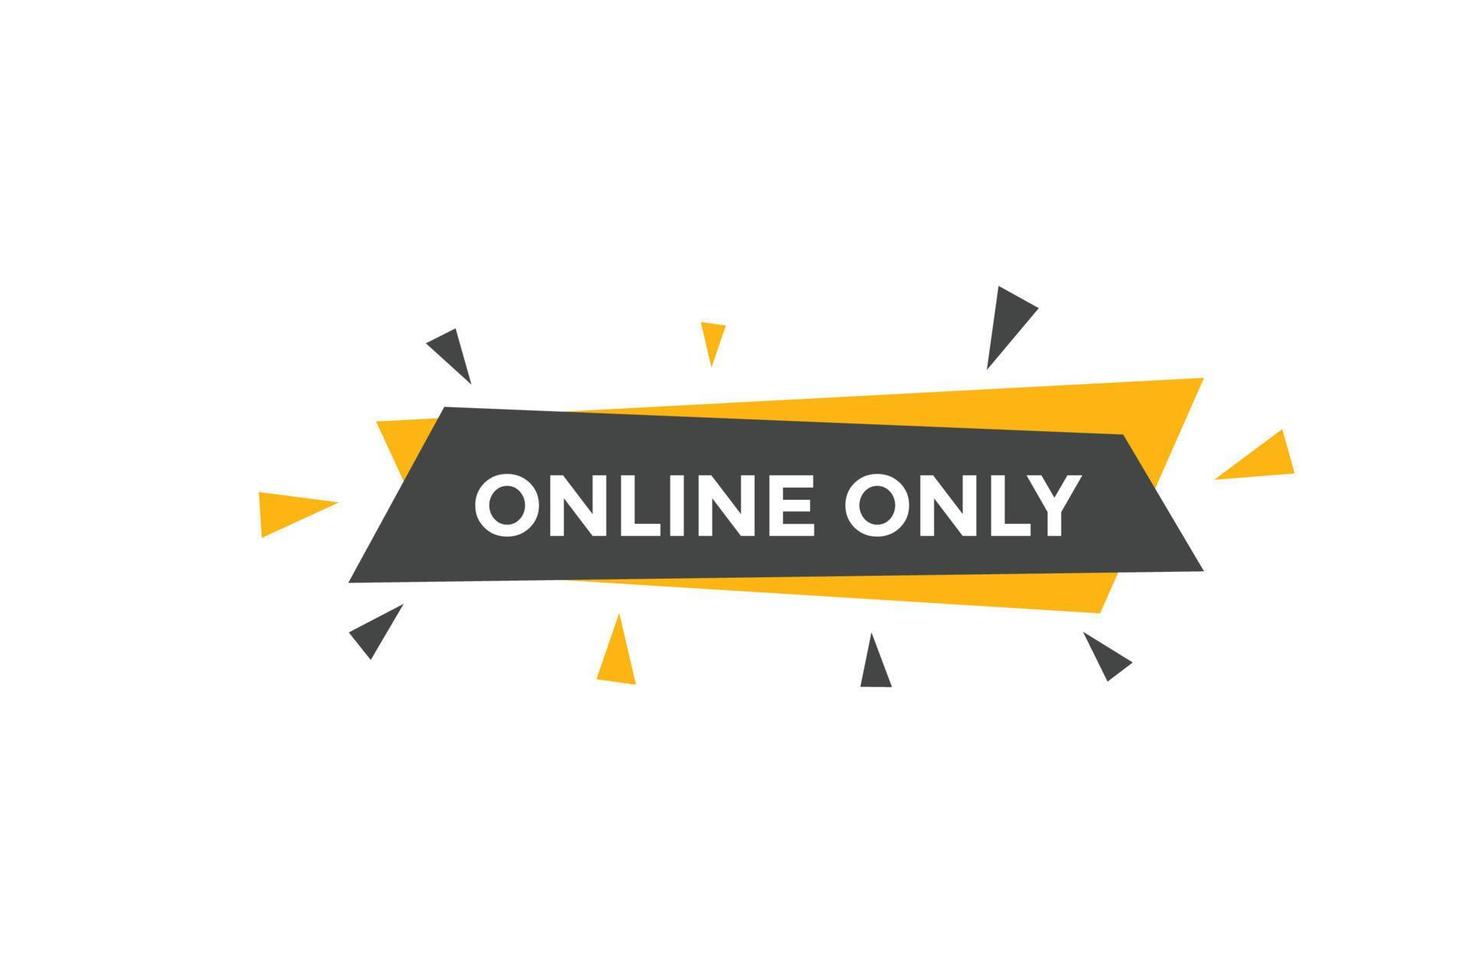 Online only button. Online only speech bubble. Online only text web template. Vector Illustration.